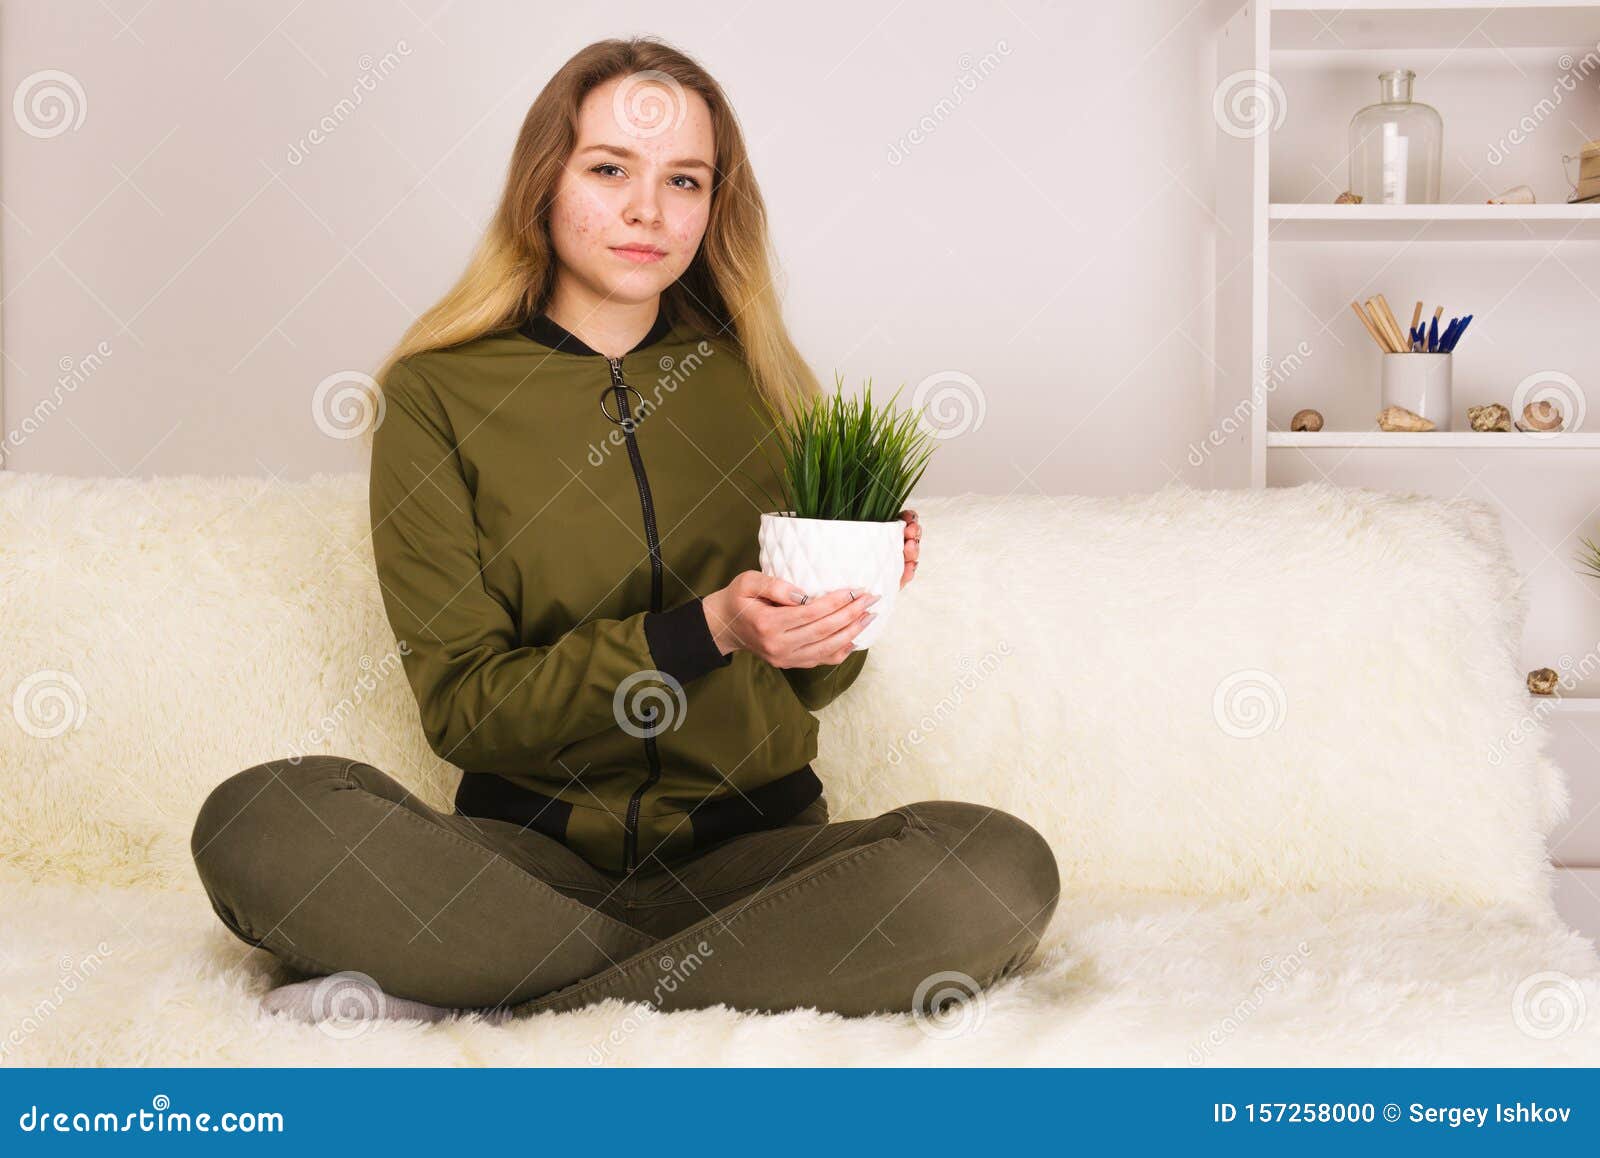 Young Teen Girl With Acne Face Sitting On Sofa And Holding Green